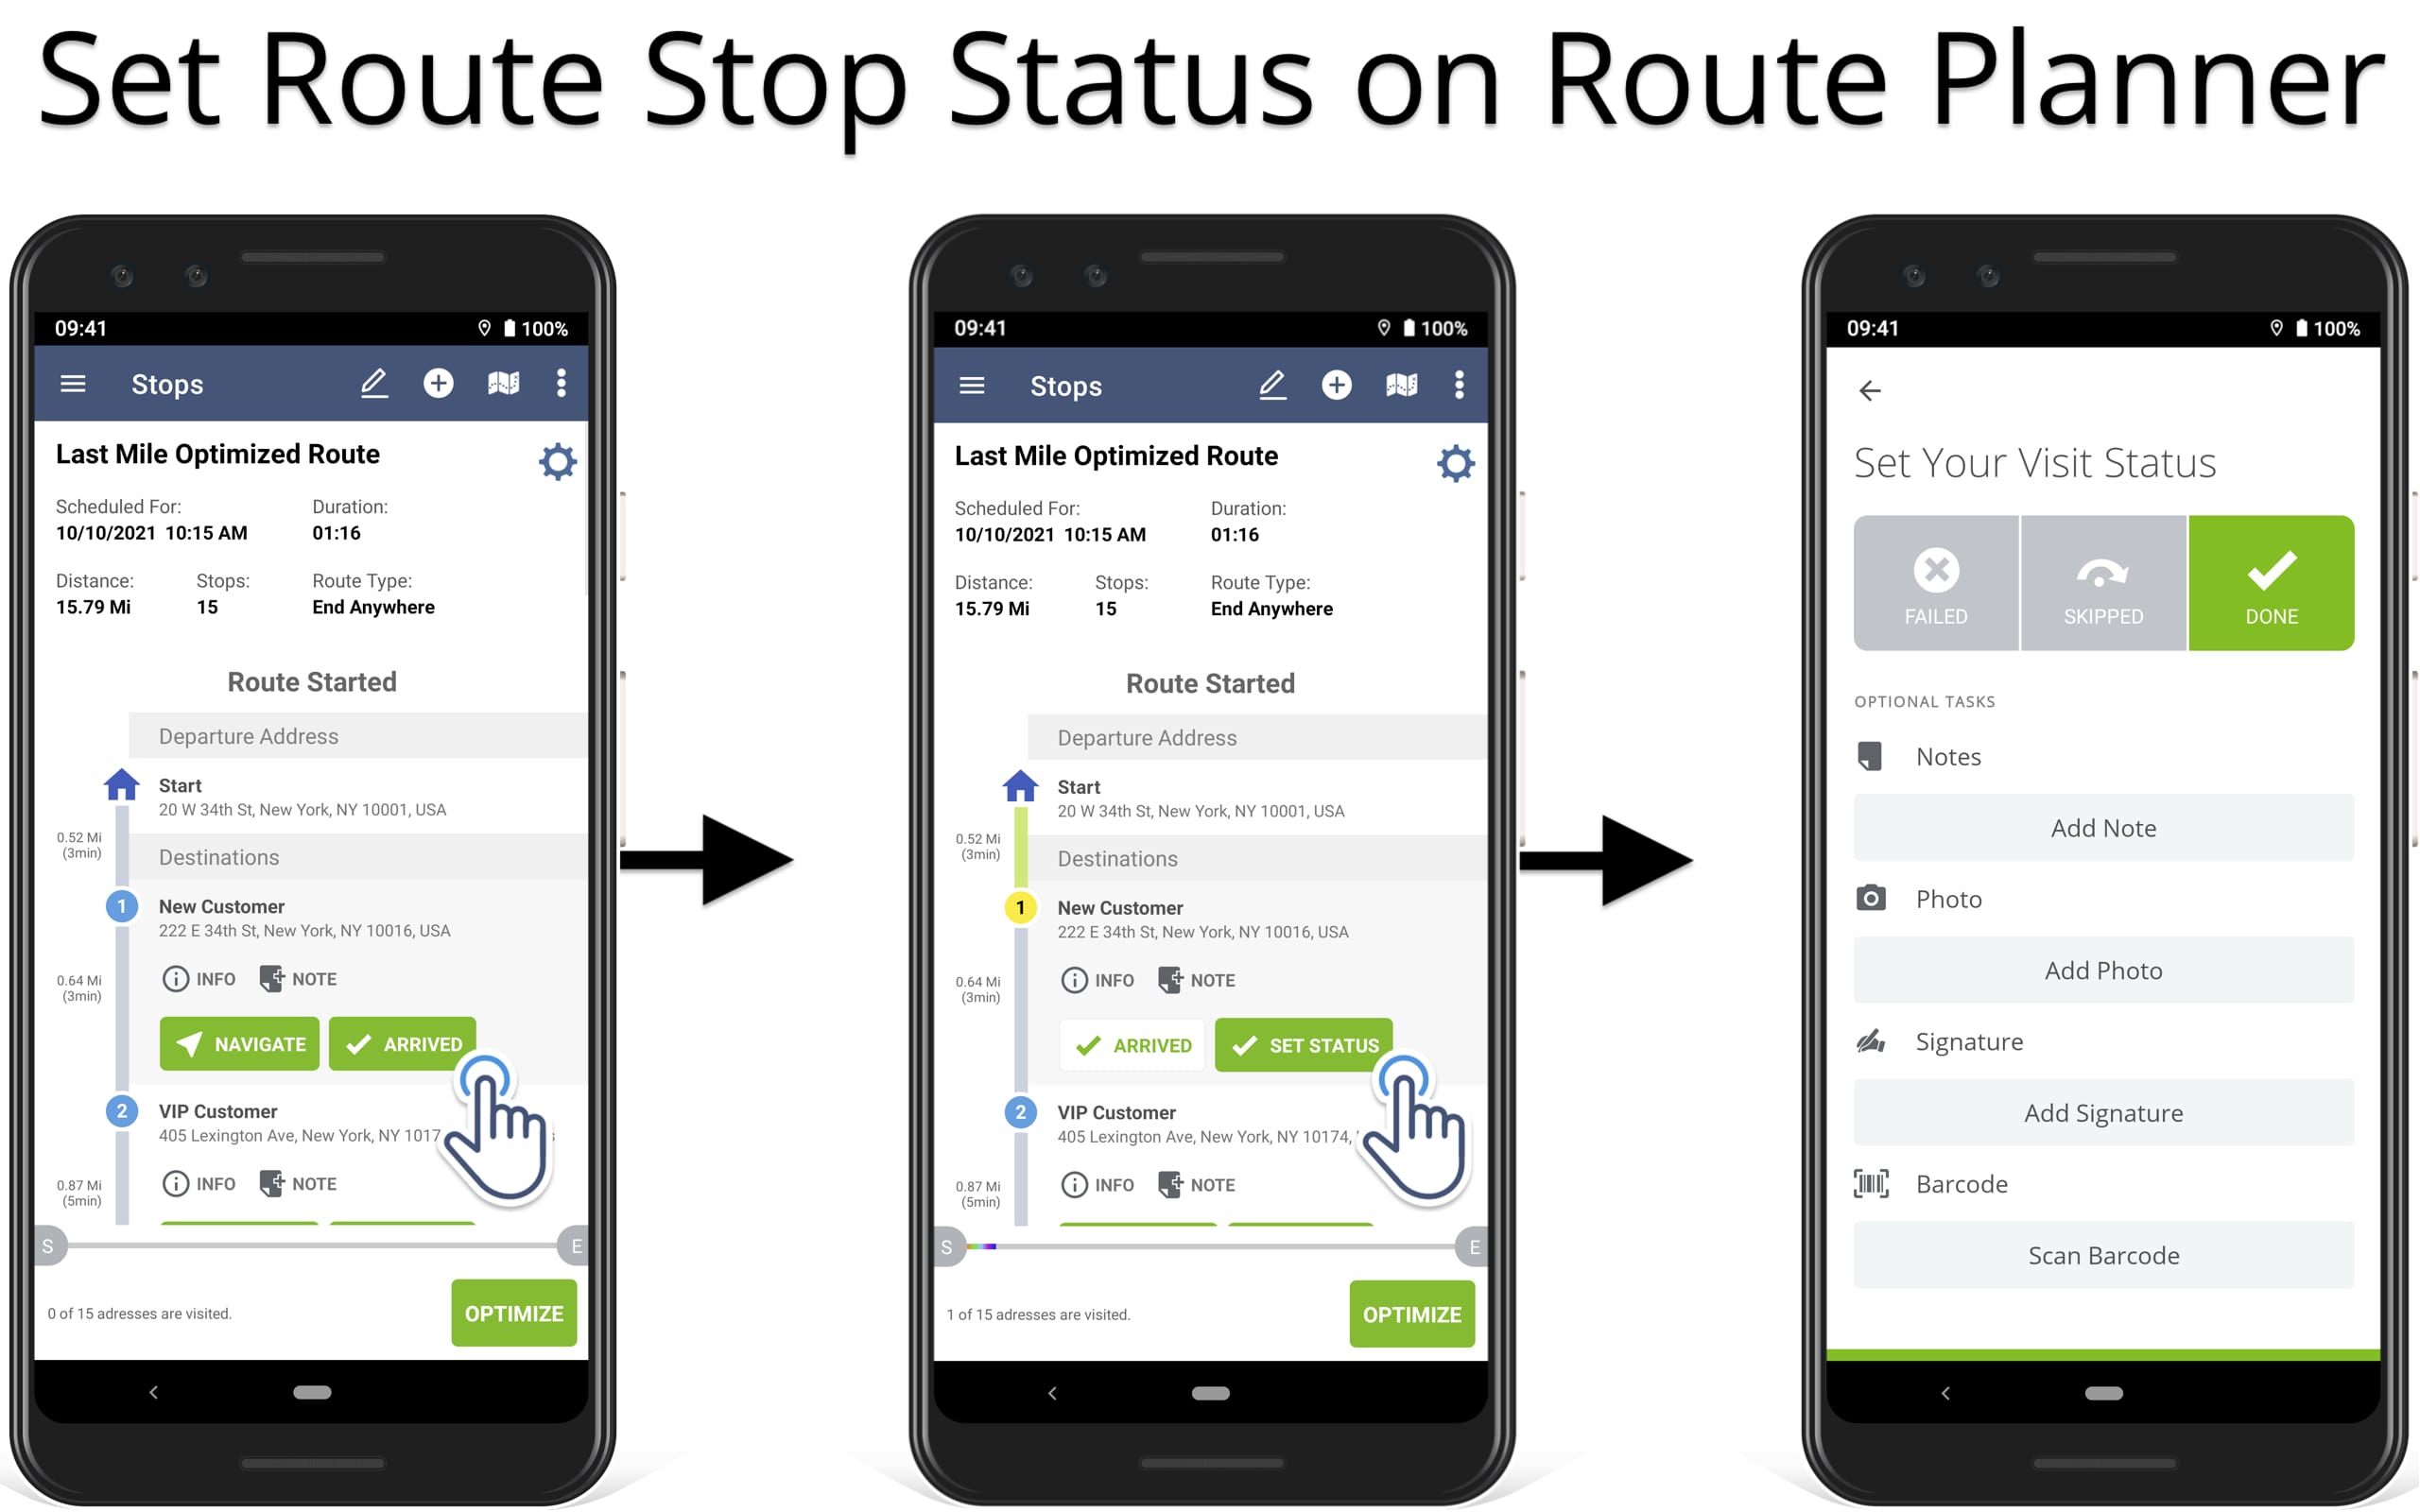 Mark the route stop as Arrived and then set route stop status for the selected destination.